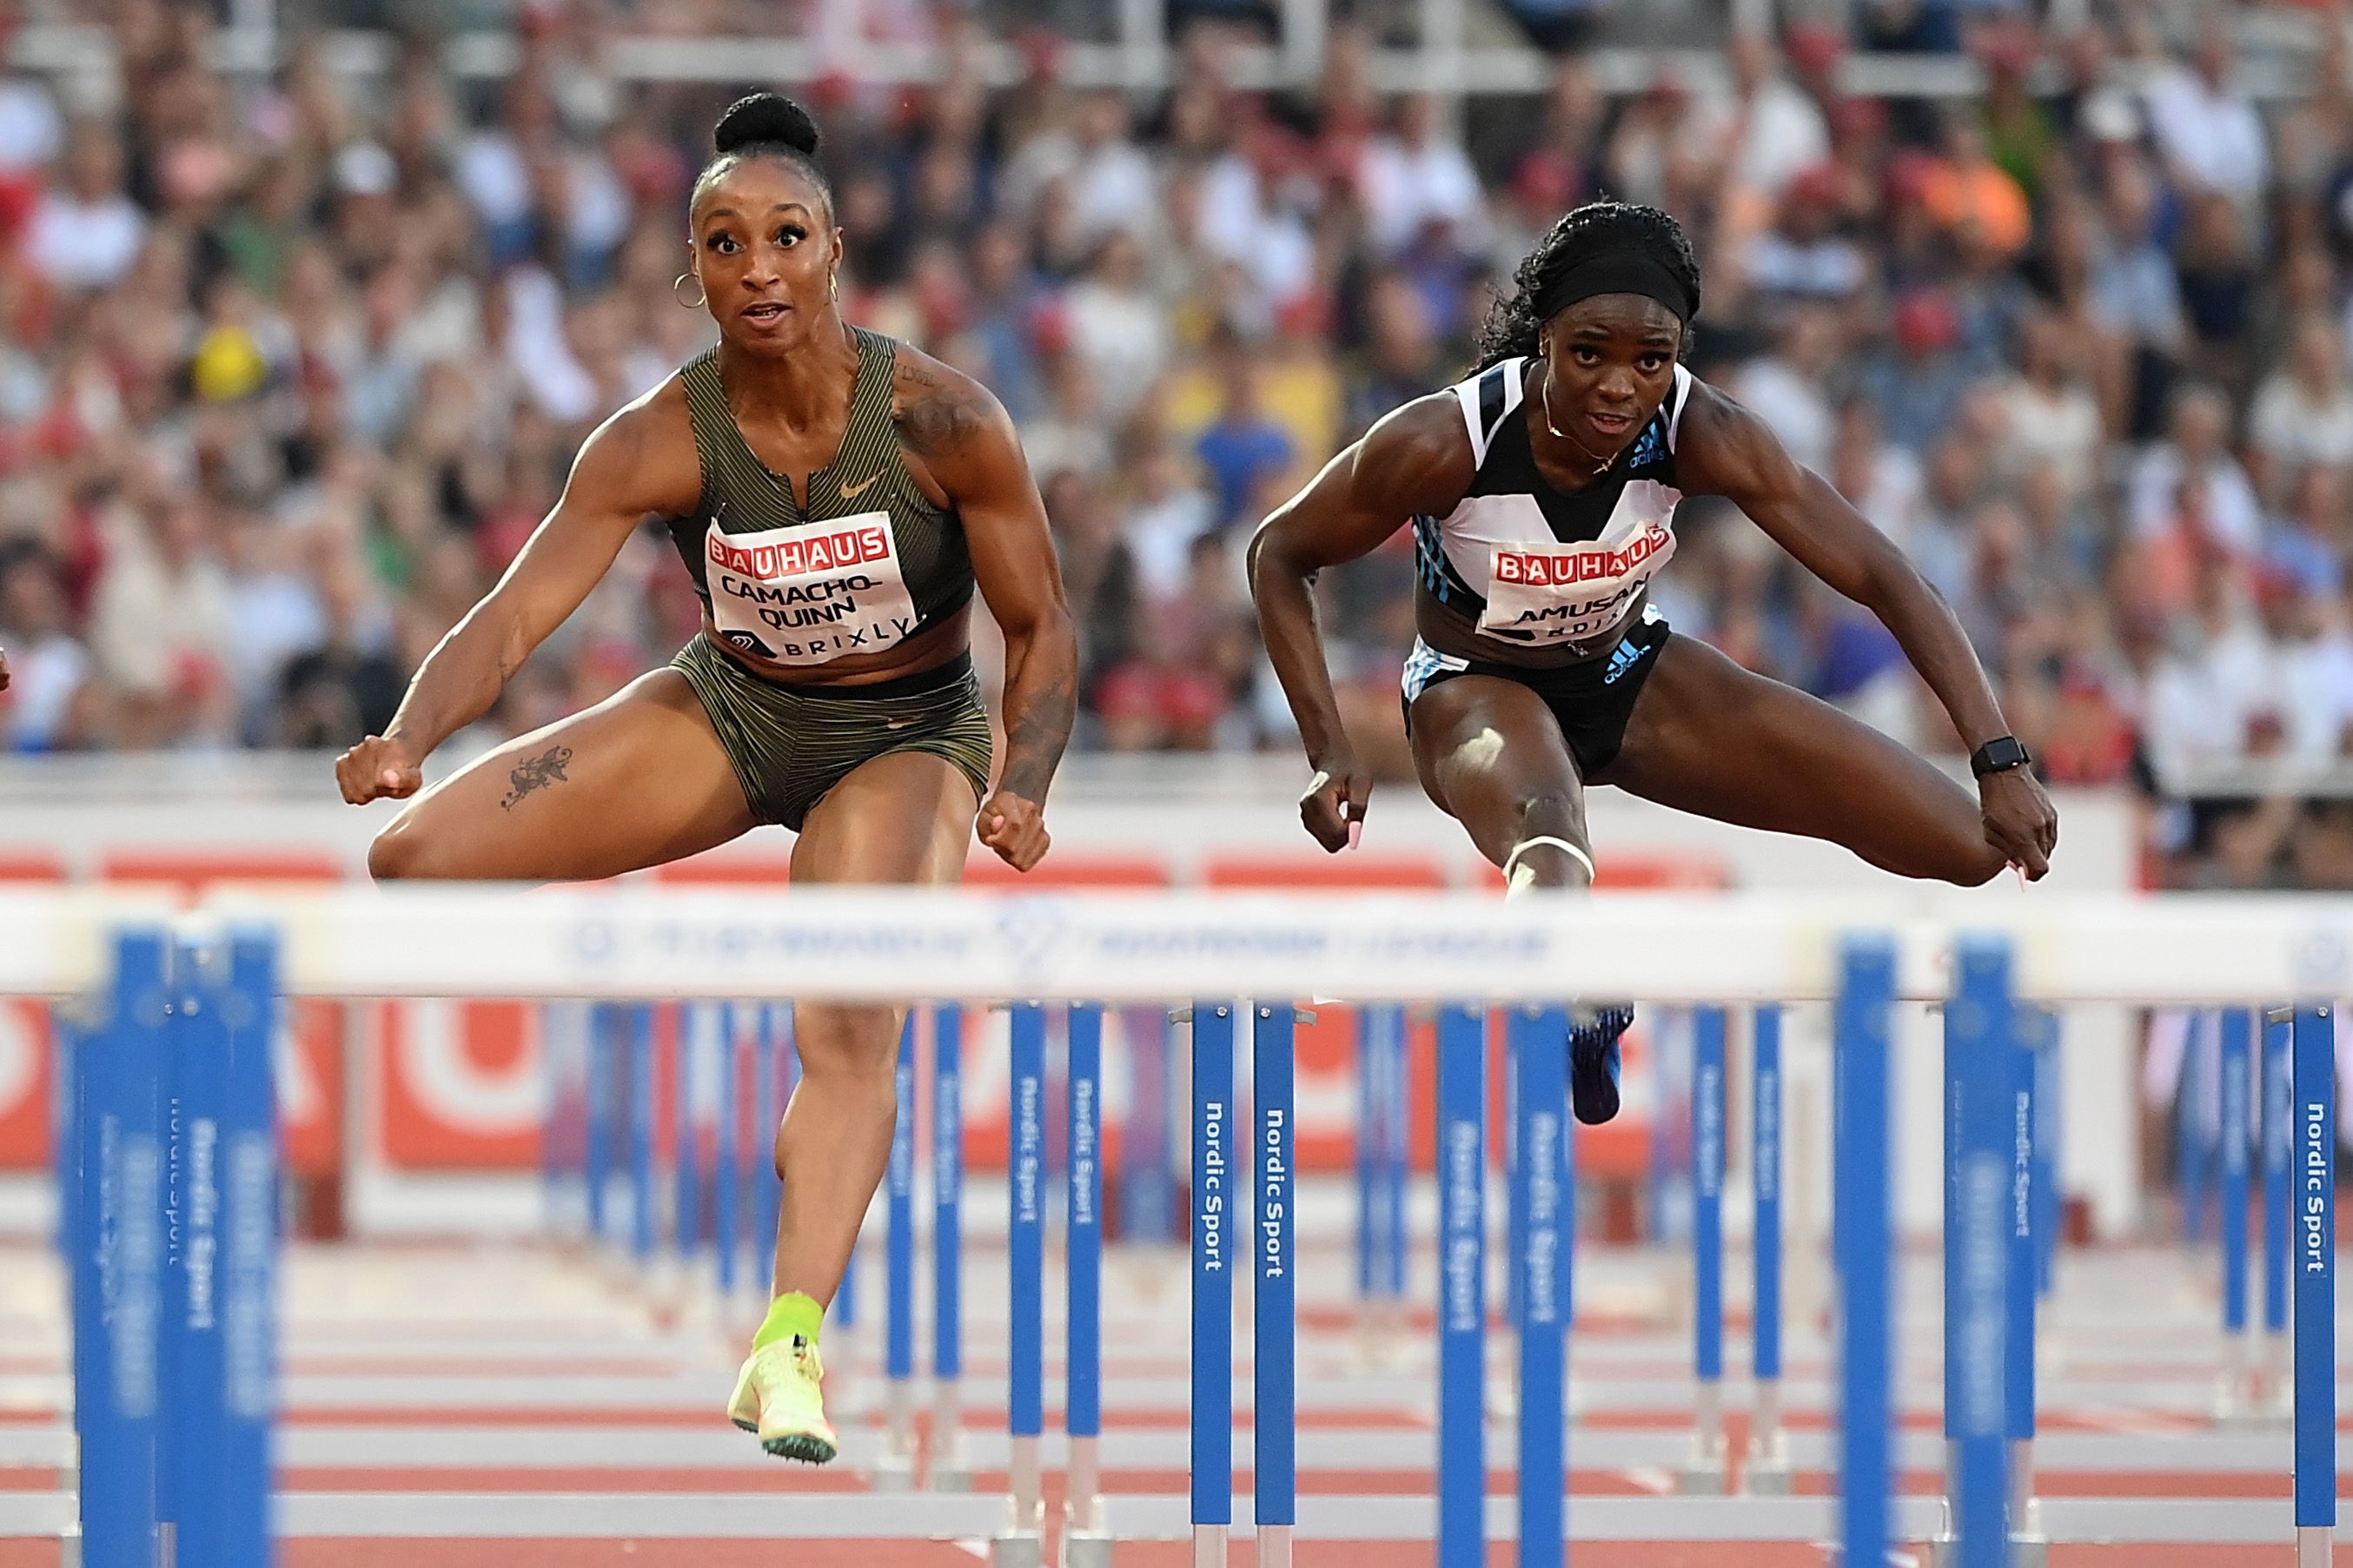 Jasmine Camacho-Quinn on her way to winning the 100m hurdles in Stockholm